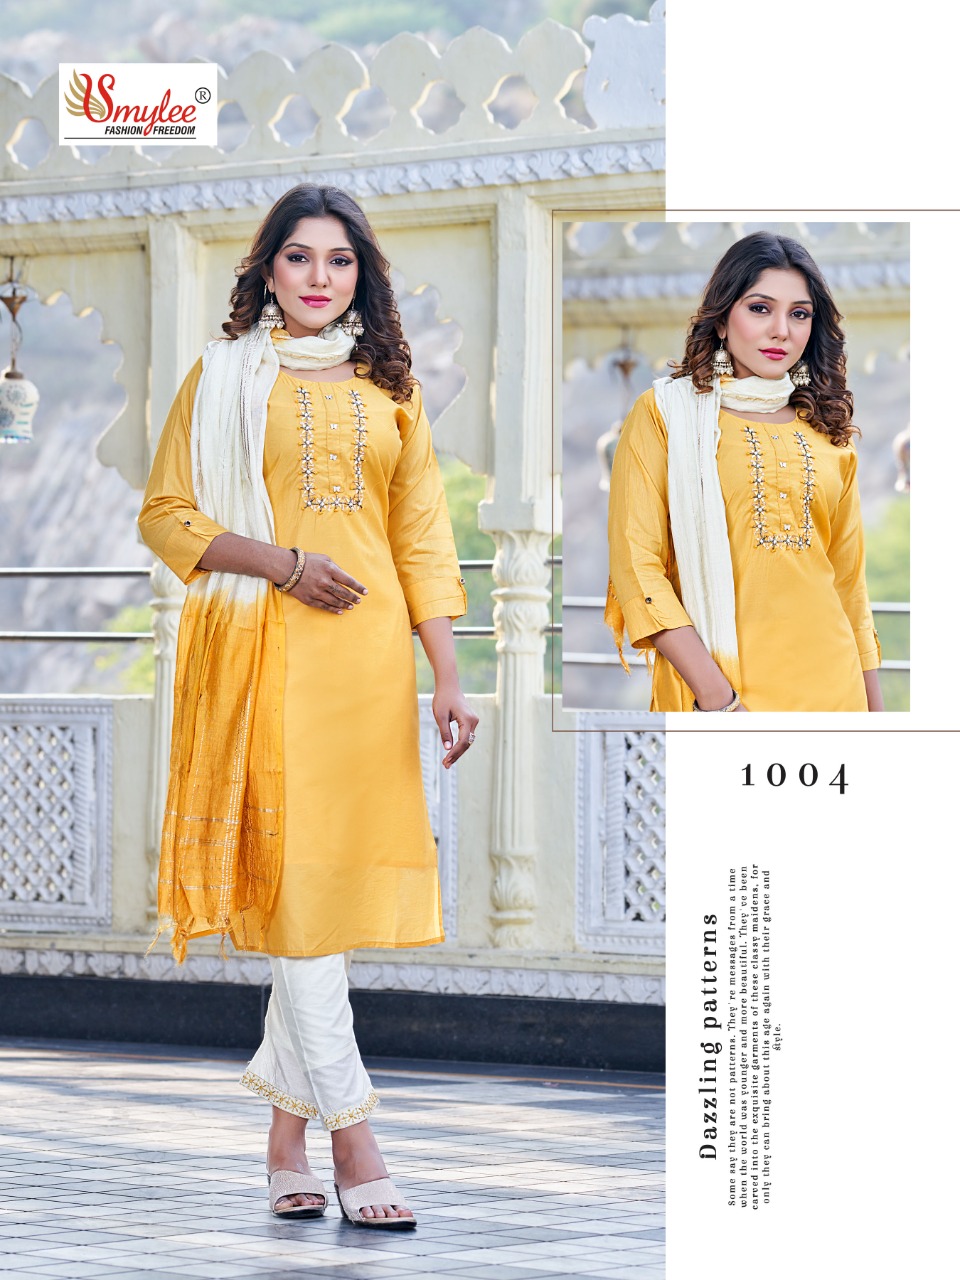 Inayat%20Smylee%20Readymade%20Pant%20Style%20Suits%20%2810%29